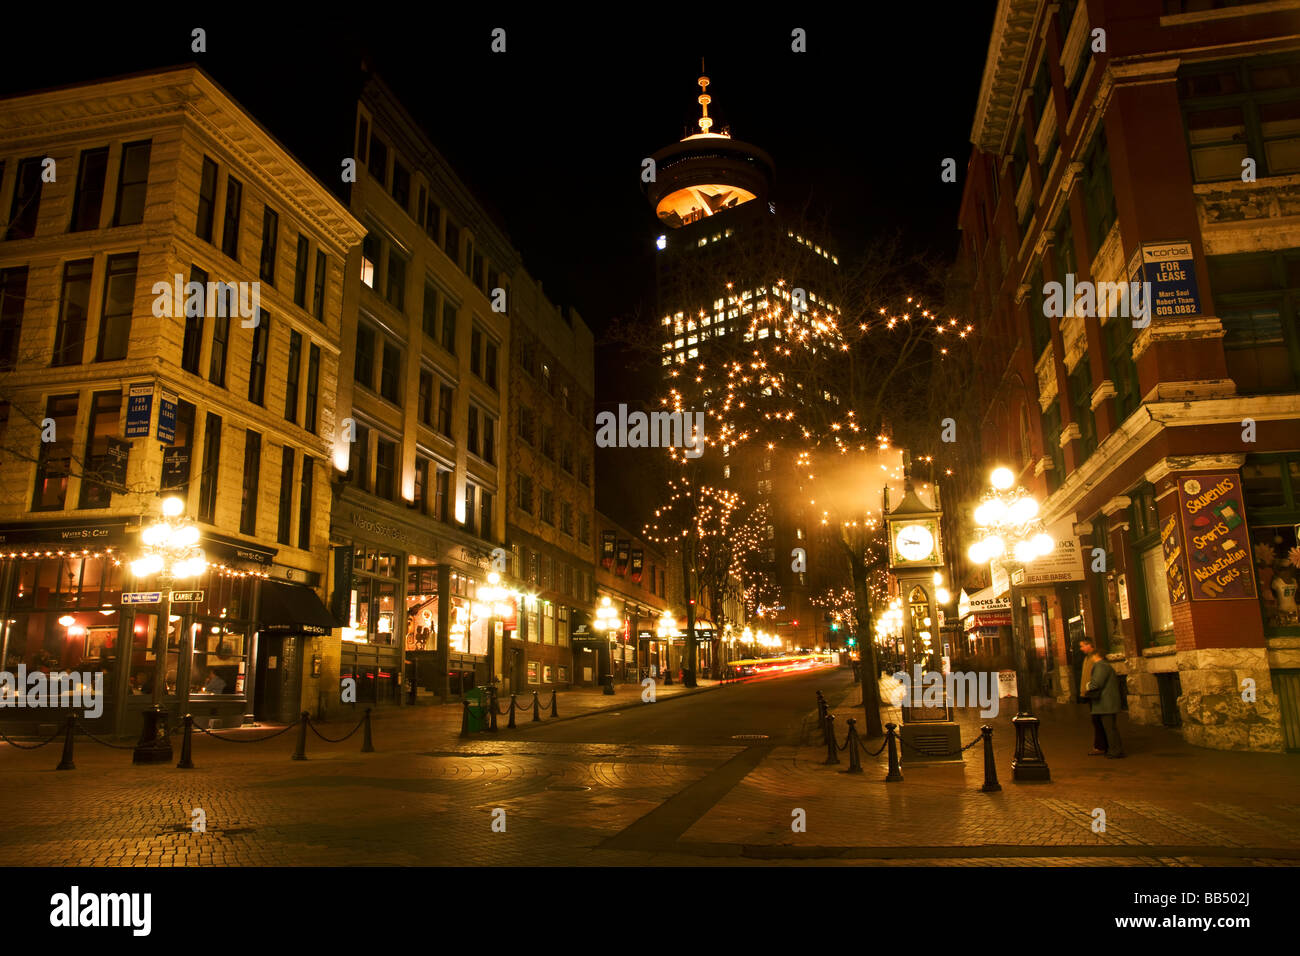 The Gastown area Vancouver British Columbia Canada Stock Photo